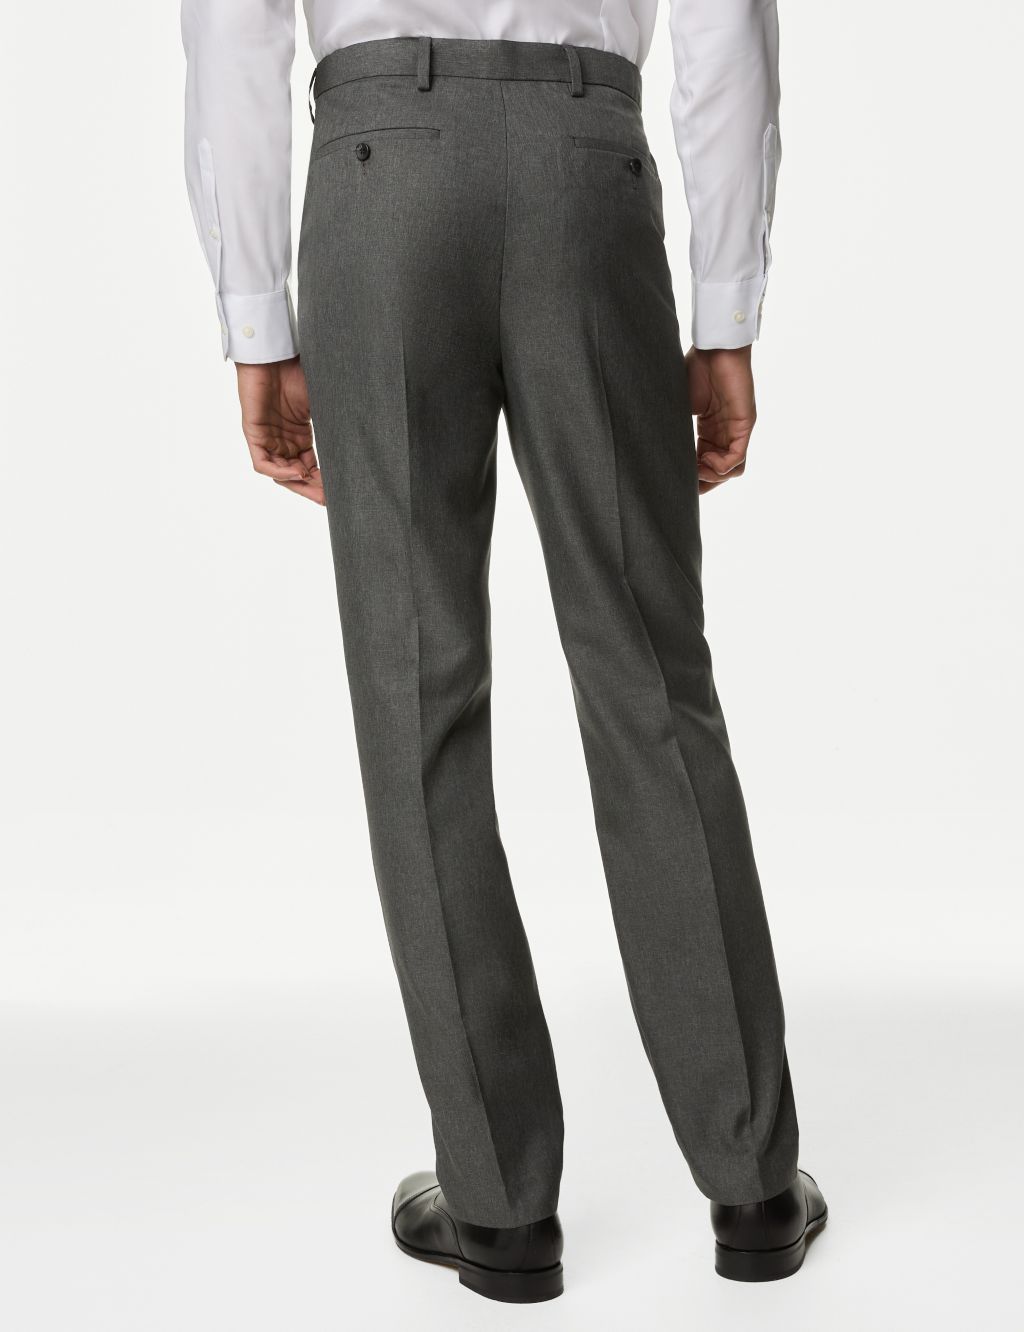 Regular Fit Trouser with Active Waist image 5